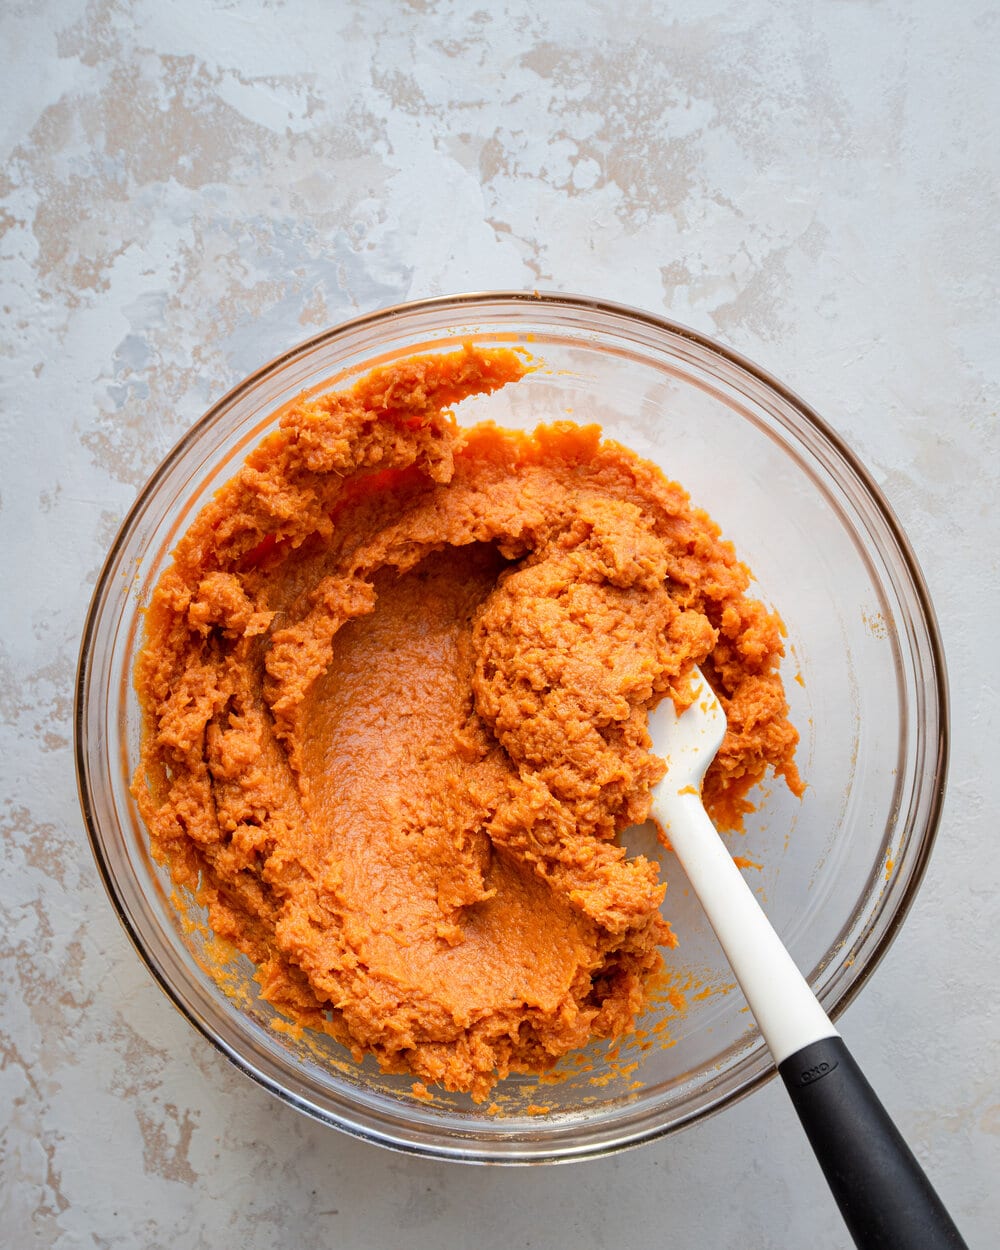 Mashed sweet potatoes mixed with spices in a glass bowl.